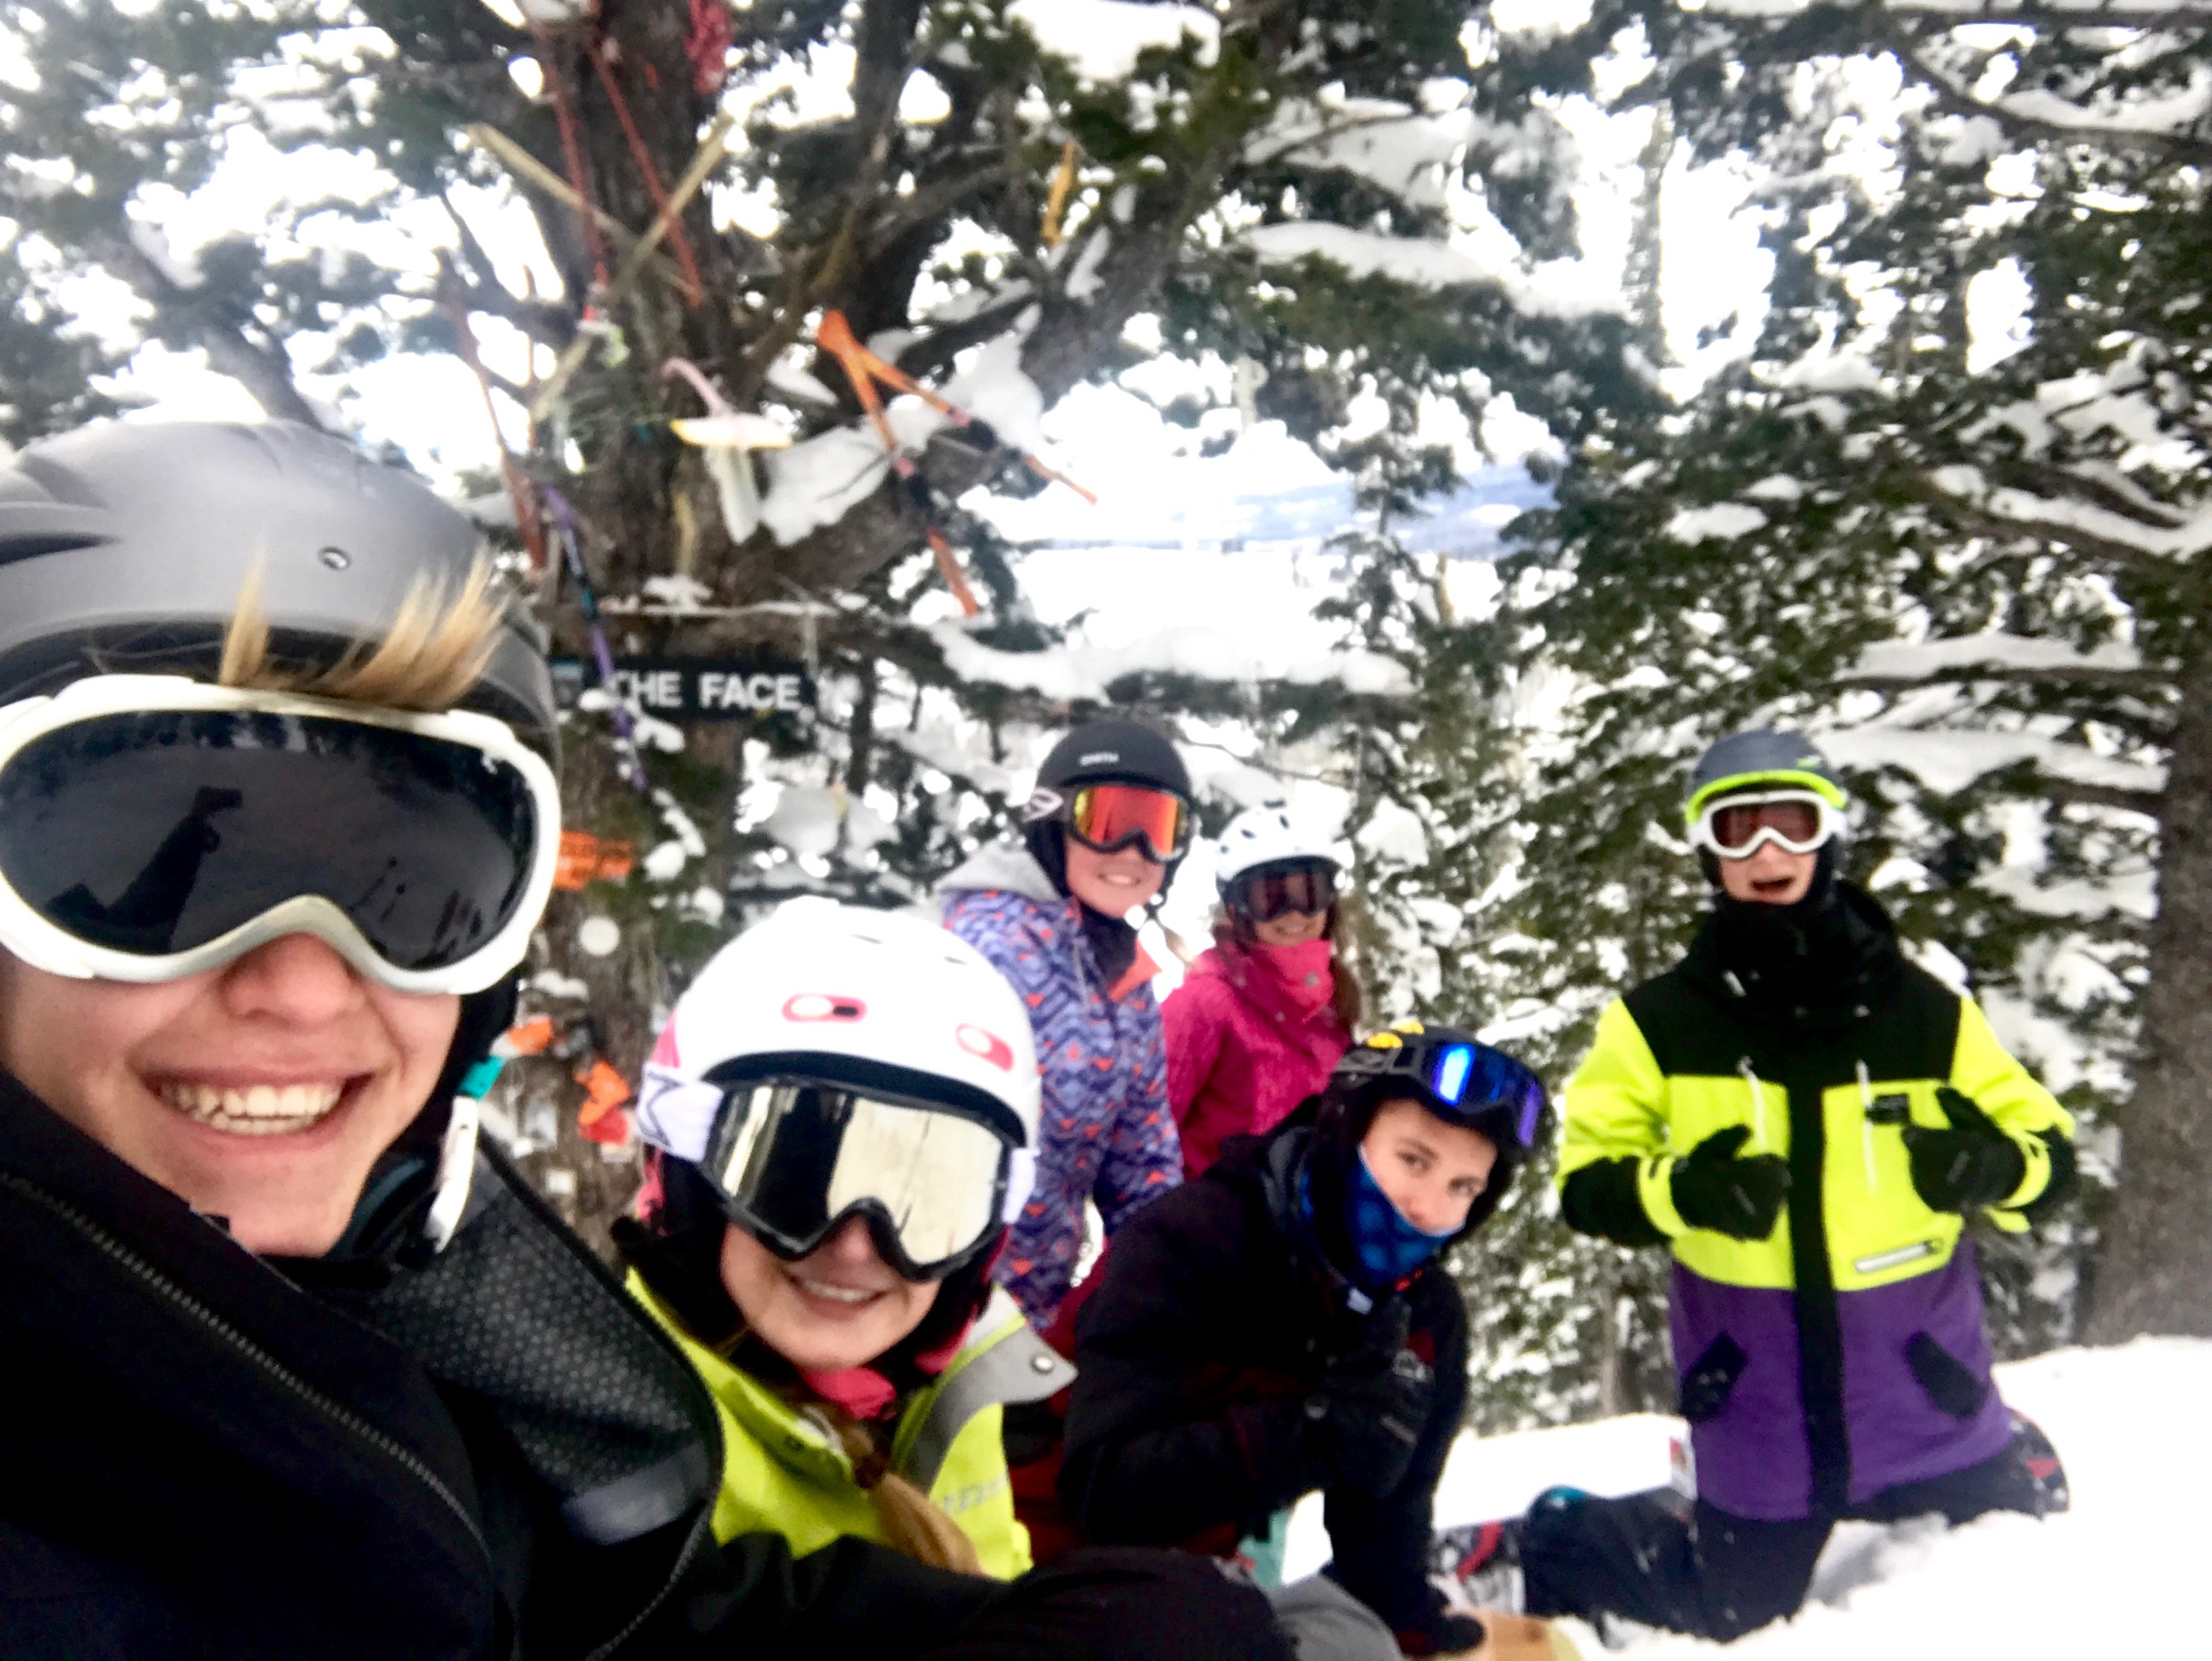  Brady Dunn and his group skiing at Targhee for a date. Photo credit Sam Fisher.